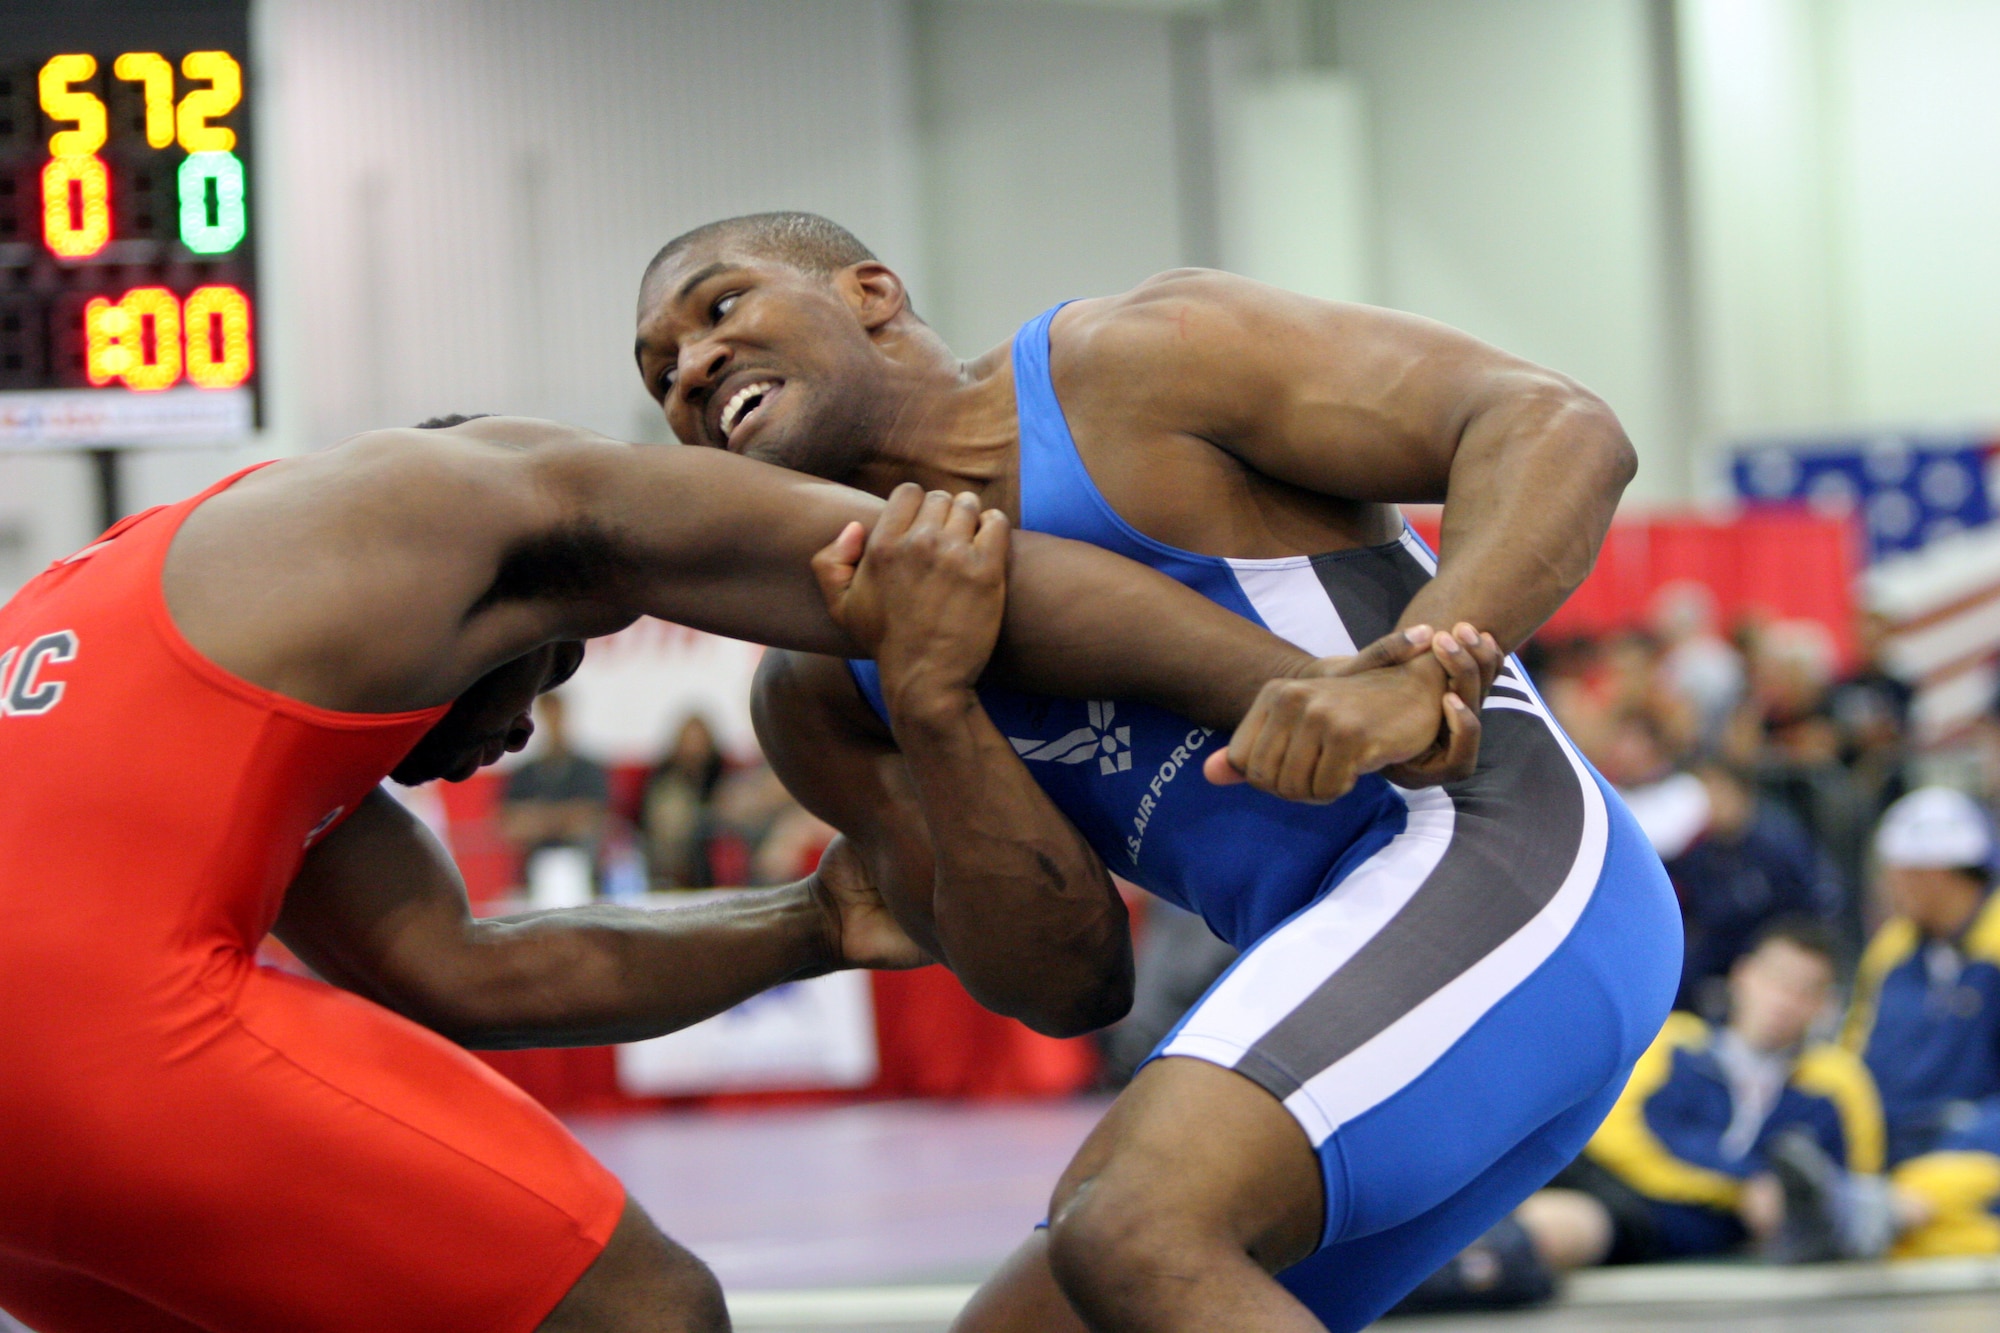 LAS VEGAS -- Lorenzo Peterson (right), a 211.2-pound division Greco-Roman wrestler, grapples with his opponent, R.C. Johnson of the New York Athletic Club, during a match at the 2005 U.S. Nationals Wrestling tournament held here April 29.  The Air Force team won first runner-up in the team standings for the tournament.  (U.S. Air Force photo by Master Sgt. Robert W. Valenca)